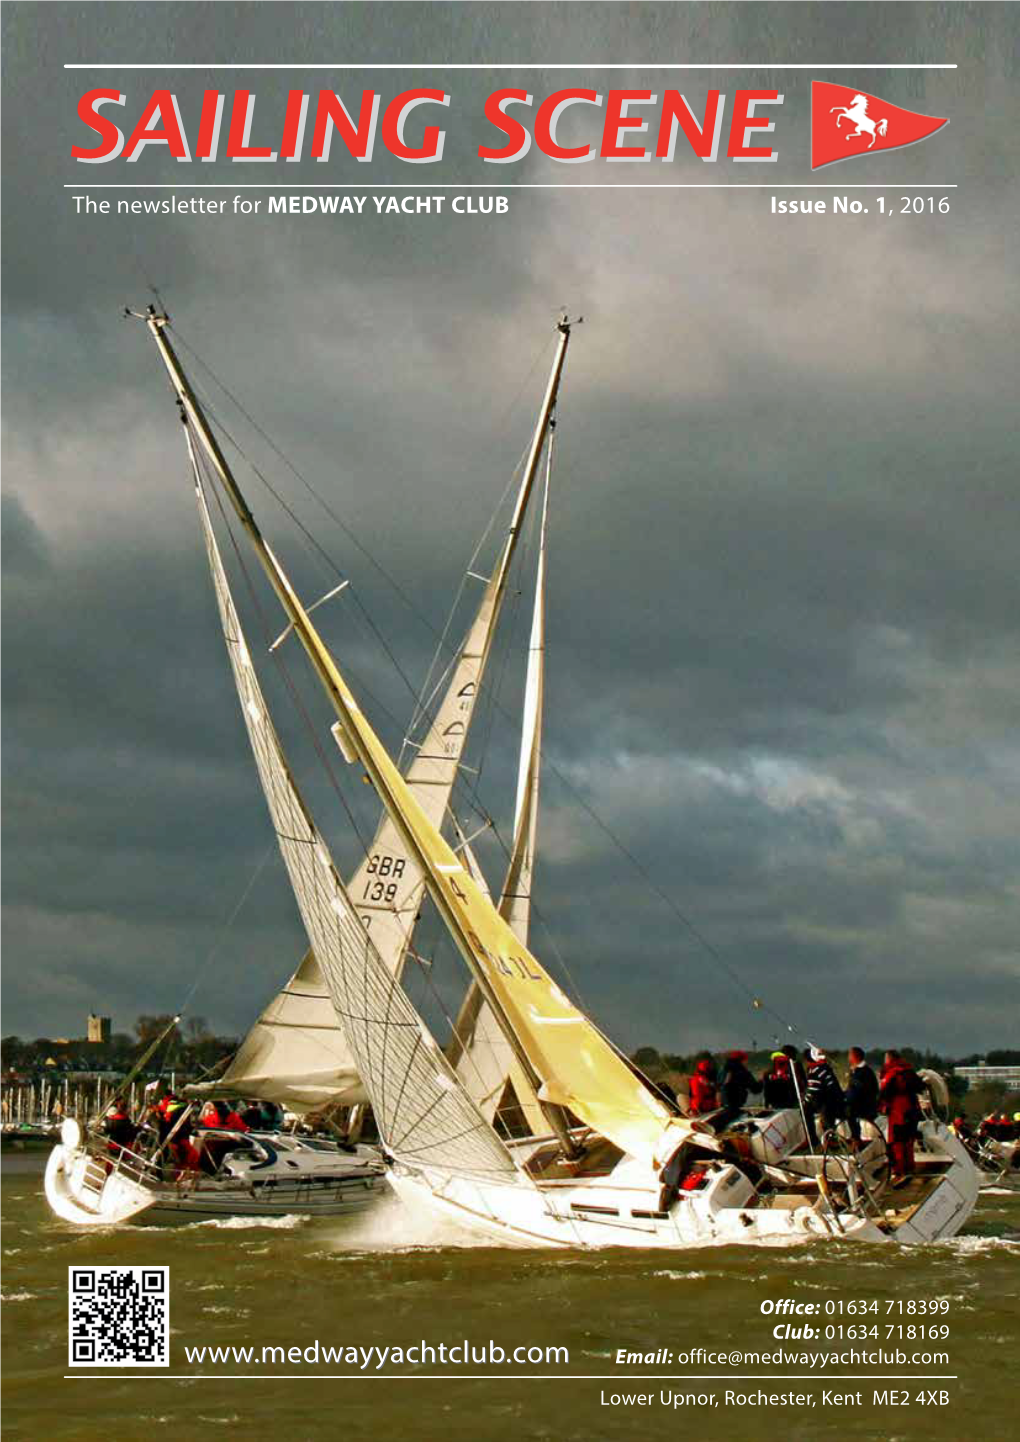 SAILING SCENESCENE the Newsletter for MEDWAY YACHT CLUB Issue No